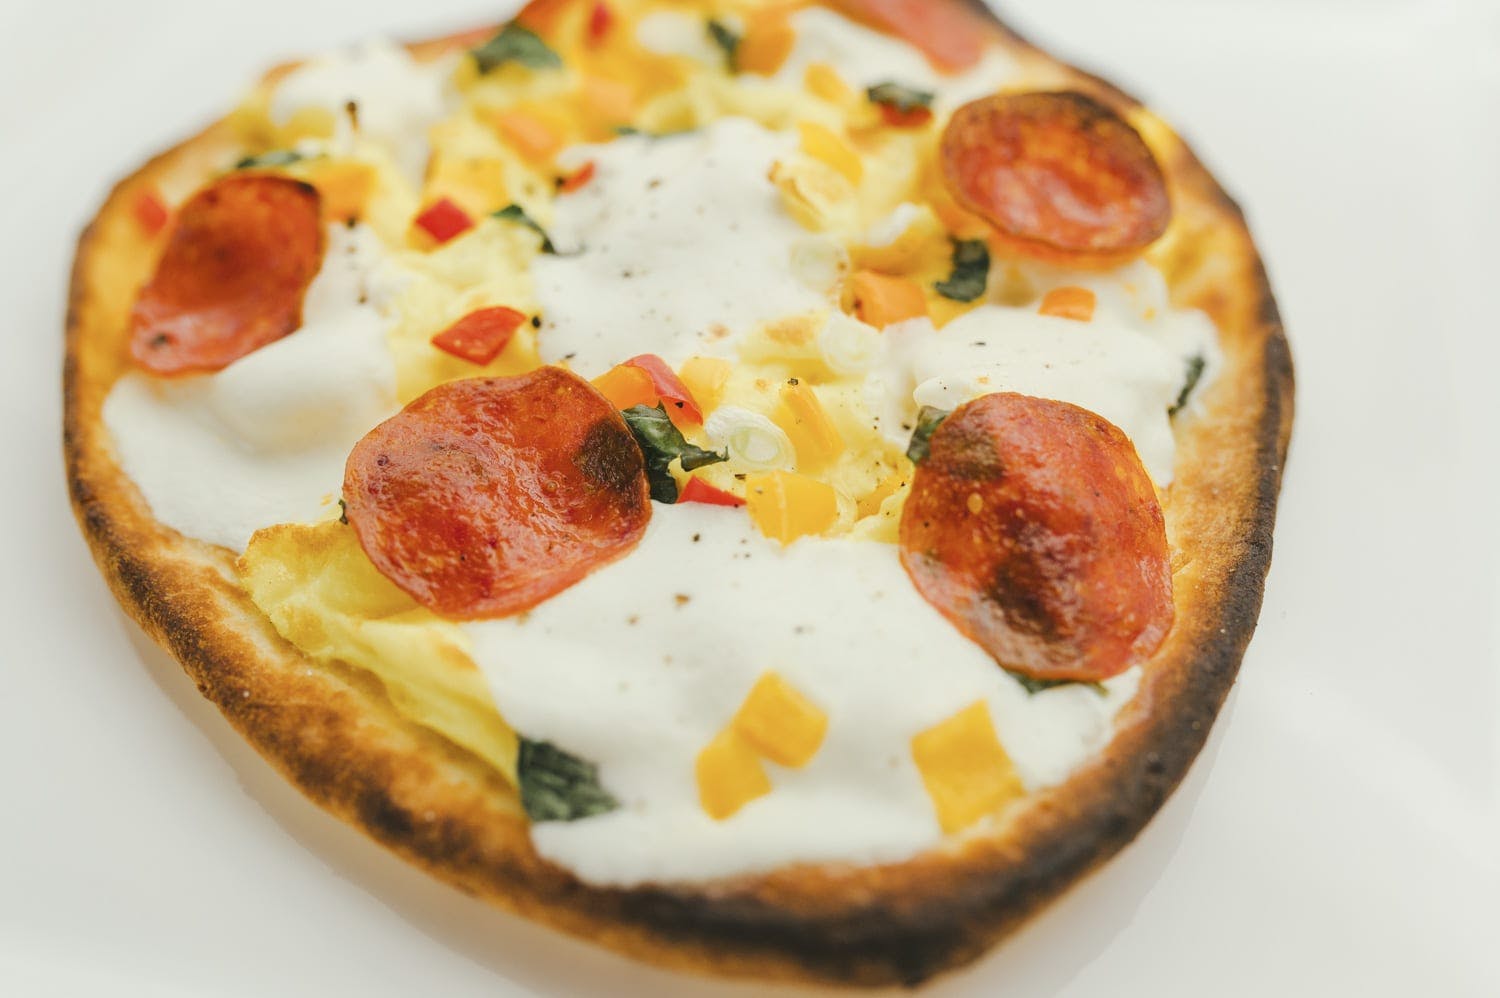 The Holly Furtick recipe: 'Egg Pizza'